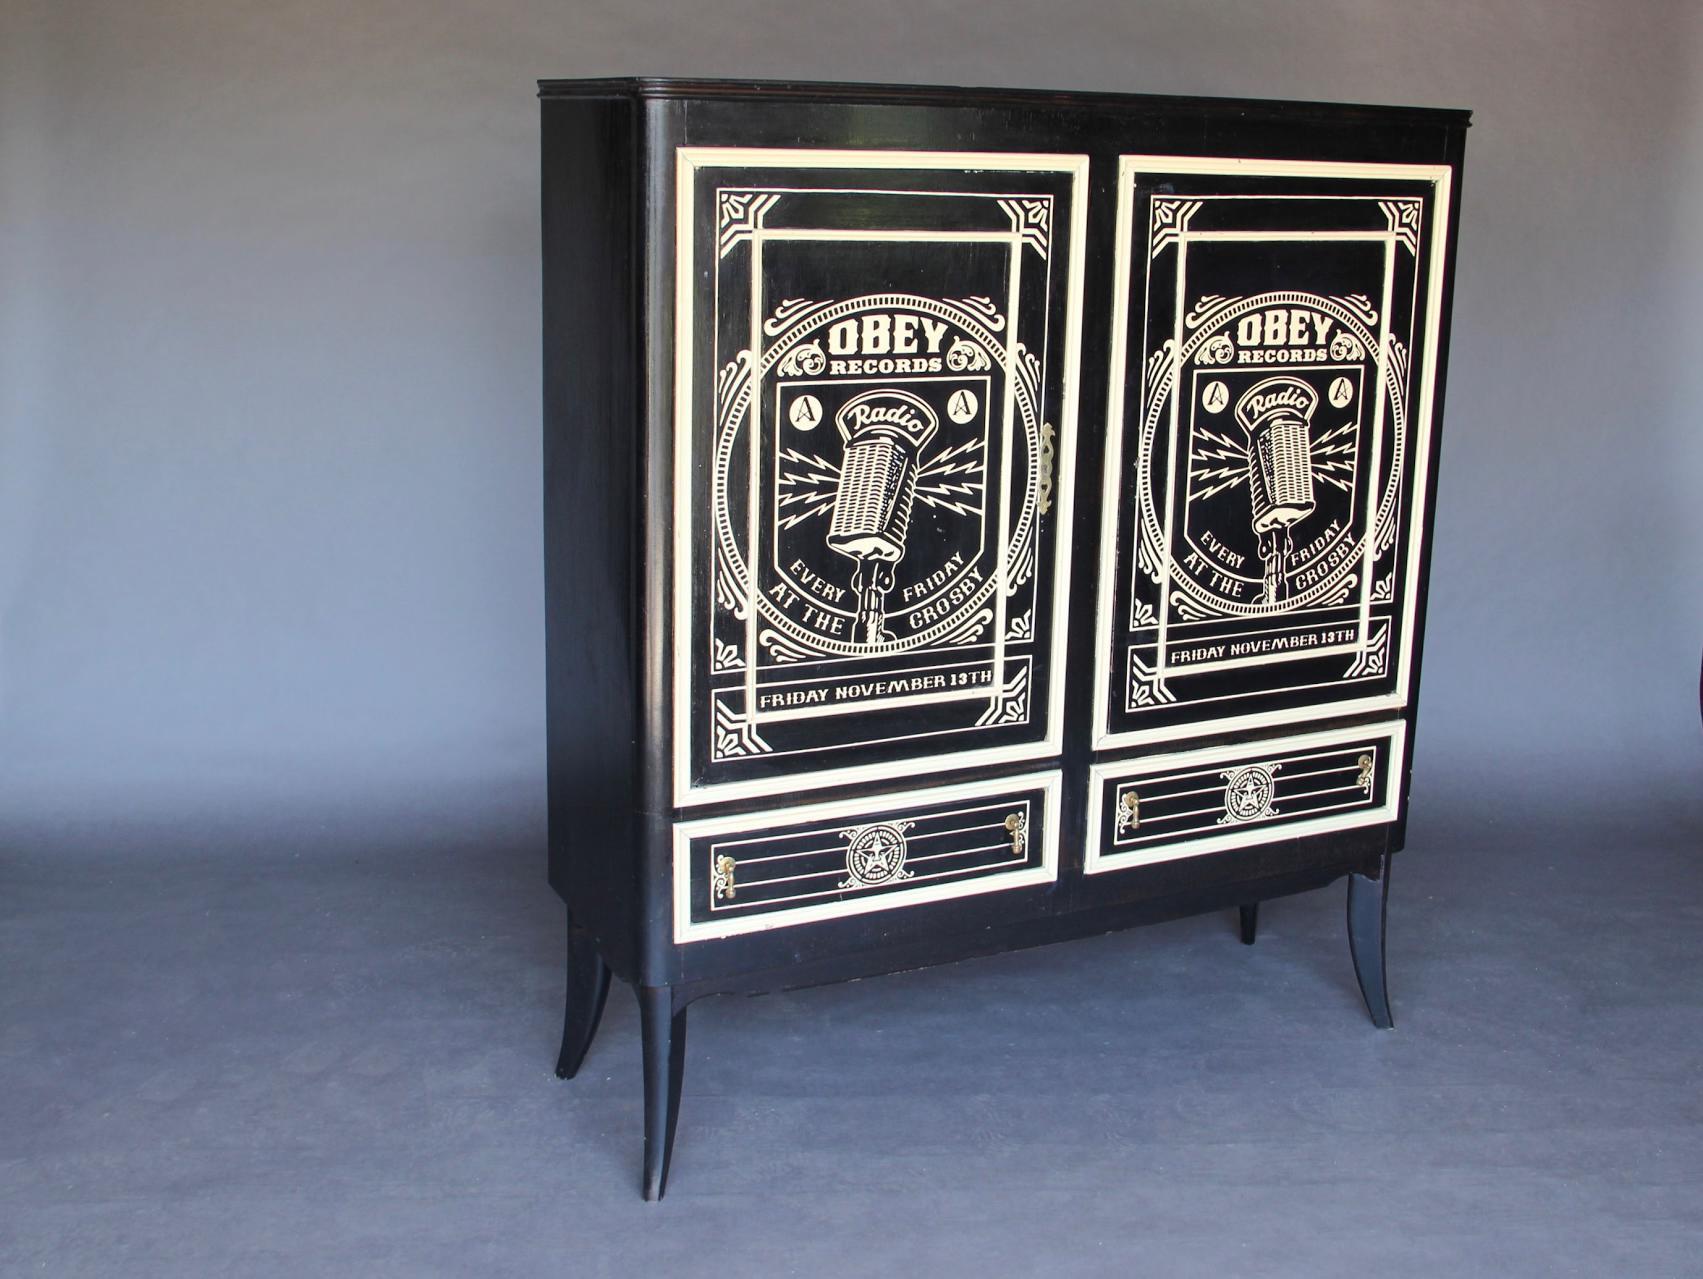 Iconic graphic Graffiti Artist Shepard Fairey designed this cabinet to benefit an Arts and Music School in San Francisco, circa 2005.
The stenciled design is typical of Fairey. The word OBEY is found in the majority of his work as well as the face